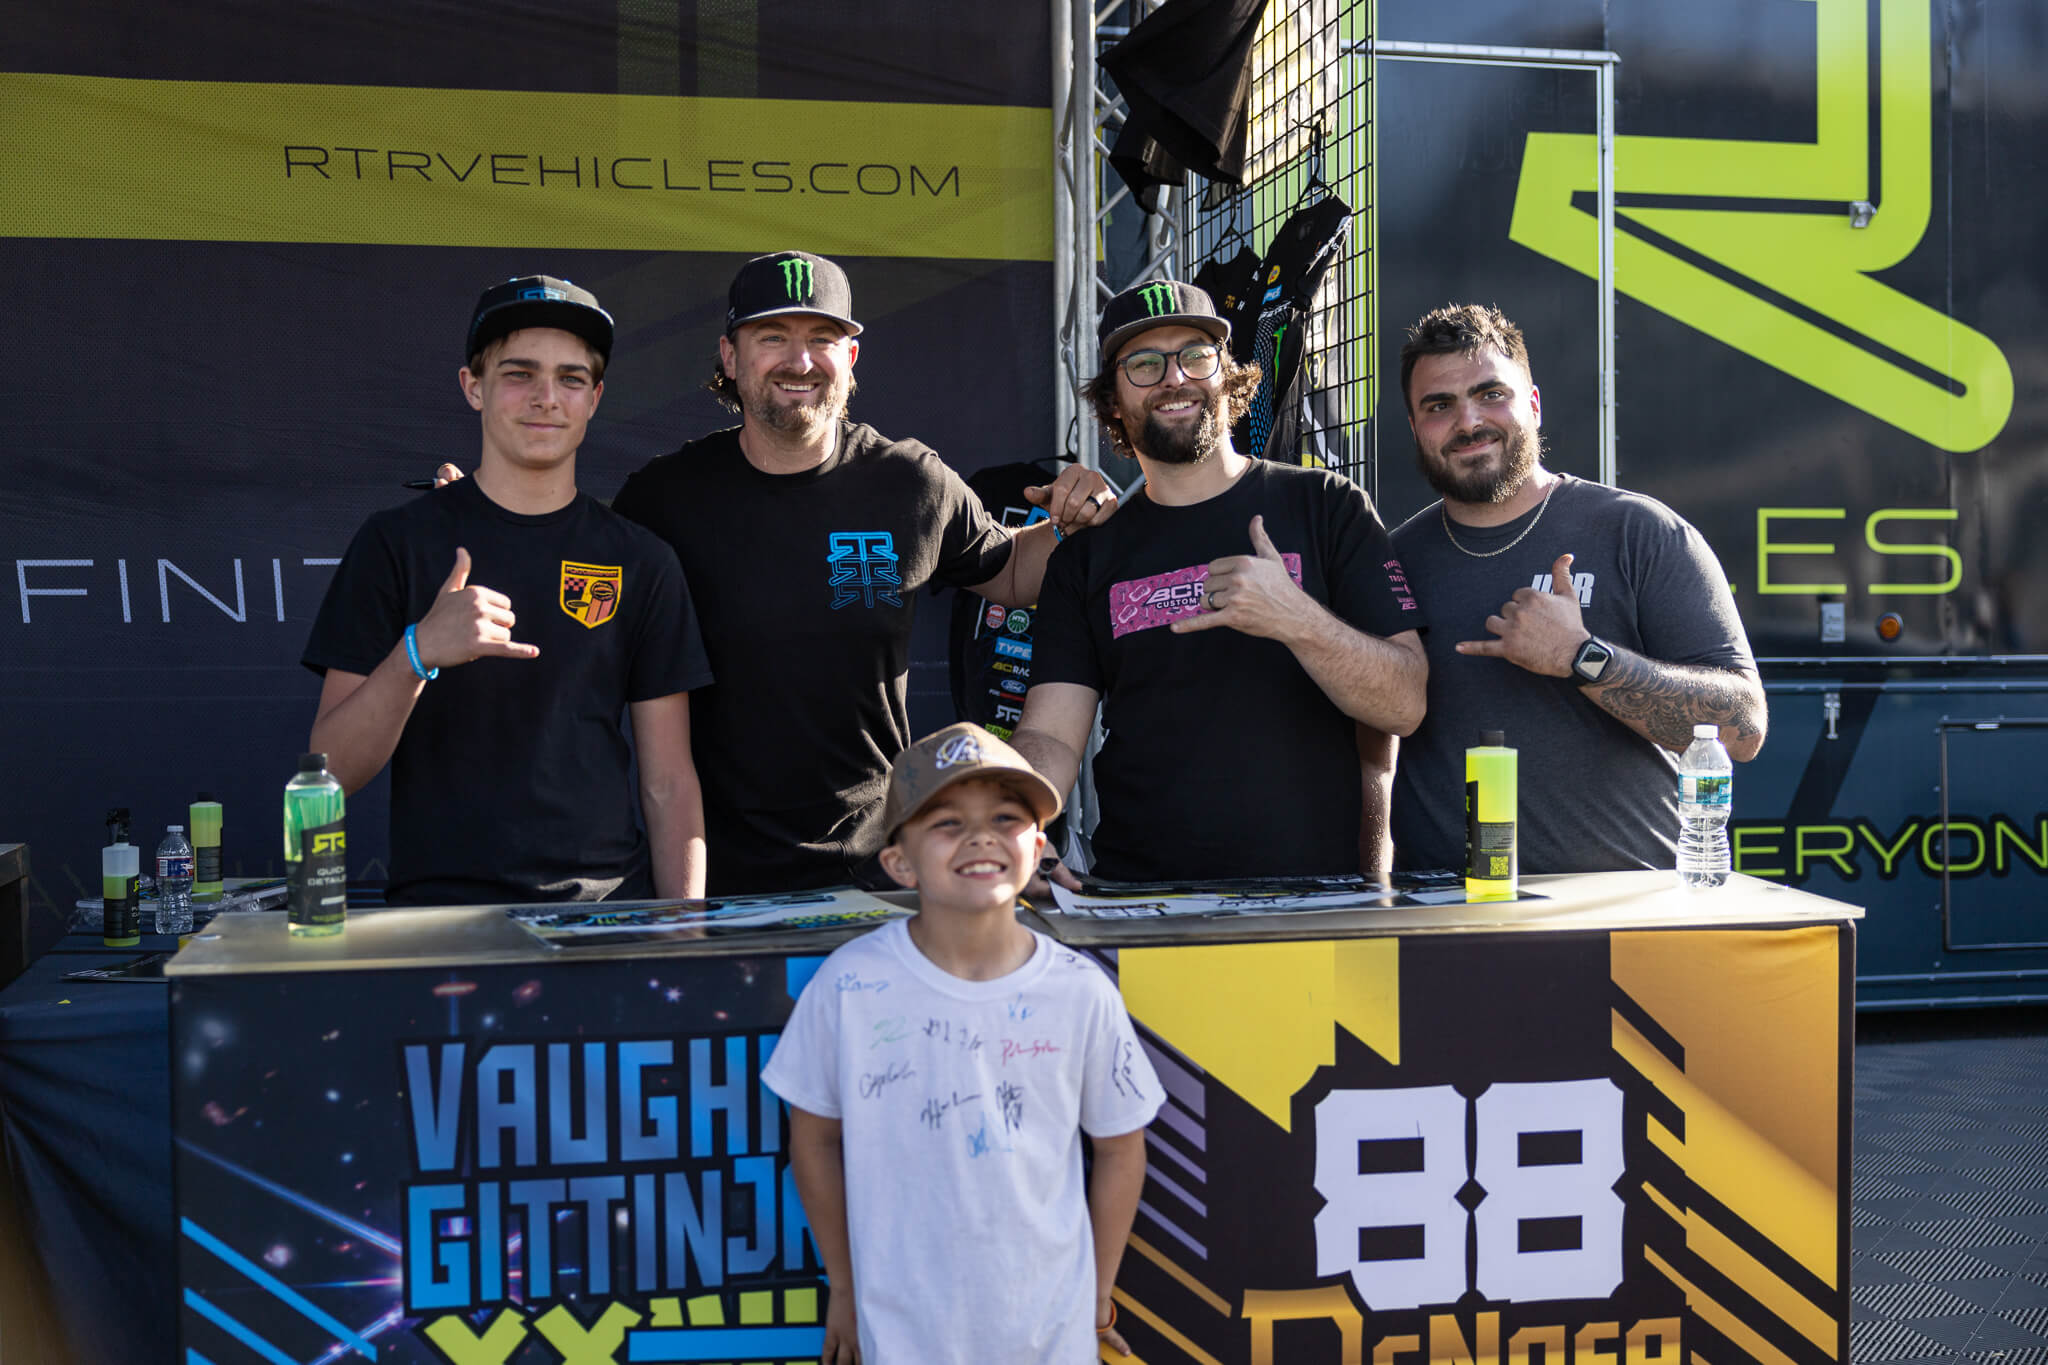 Vaughn Gittin Jr and Chelsea DeNofa take pictures with fans